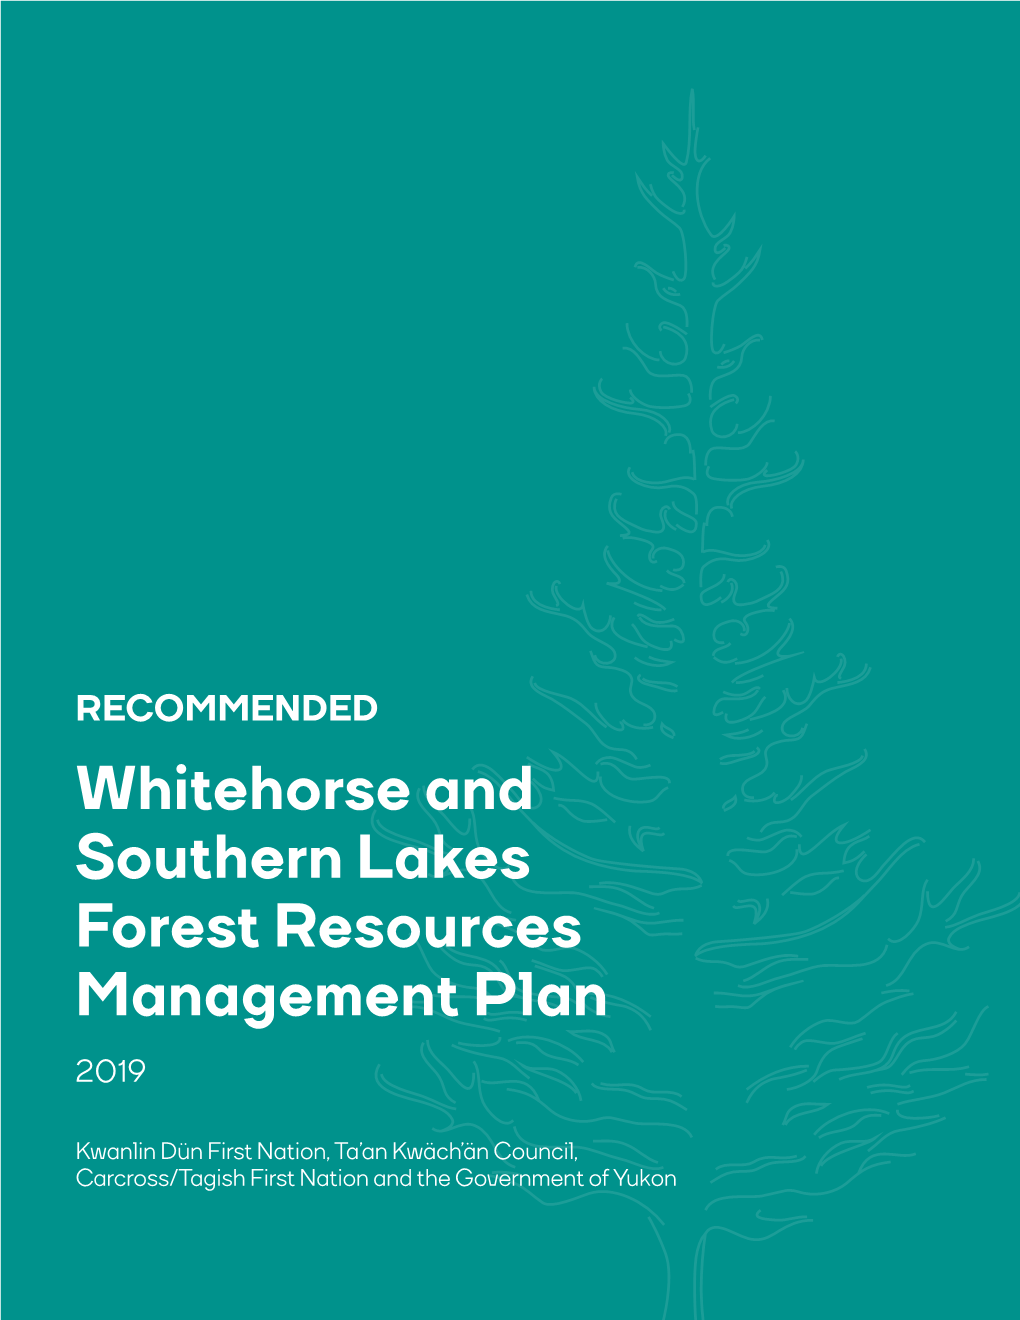 Whitehorse and Southern Lakes Forest Resources Management Plan 2019